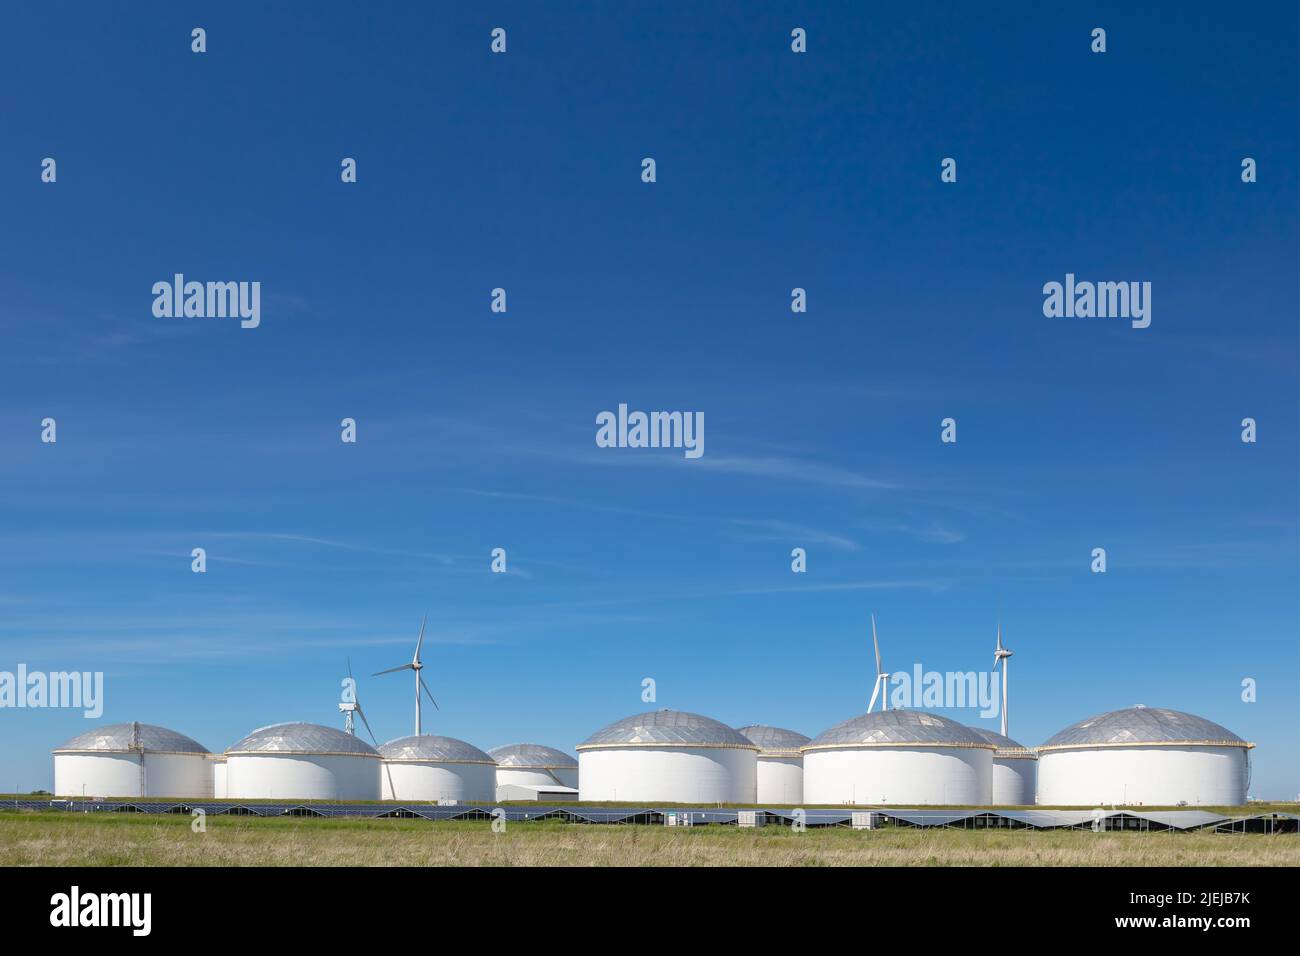 Large Dutch gas and fuel storage tanks with wind turbines and solar panels in front in the Eemshaven, The Netherlands Stock Photo